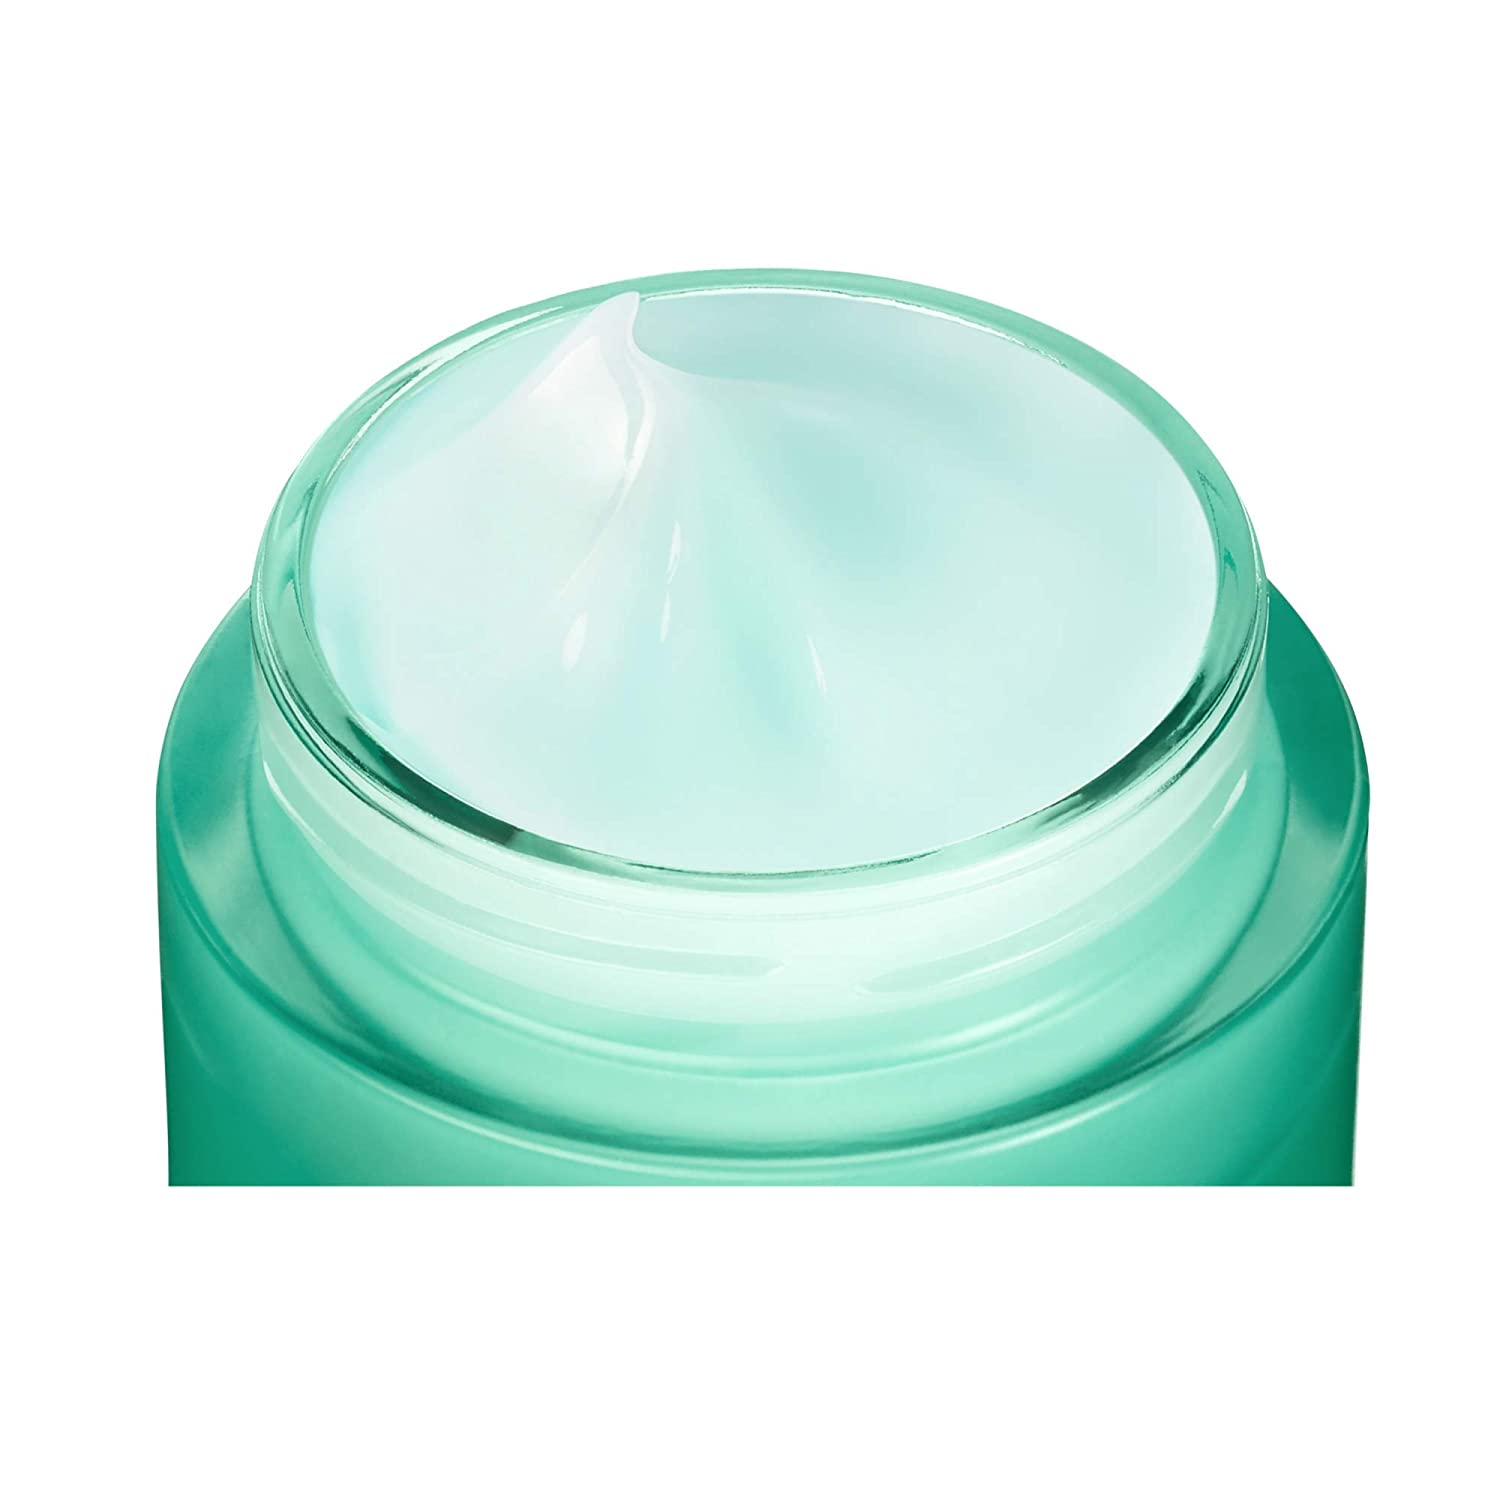 Biotherm Aquapower Moisturising Face Cream for Men 72H Concentrated Glacial Hydrator 50ml (Packaging May Vary), ‎transparent